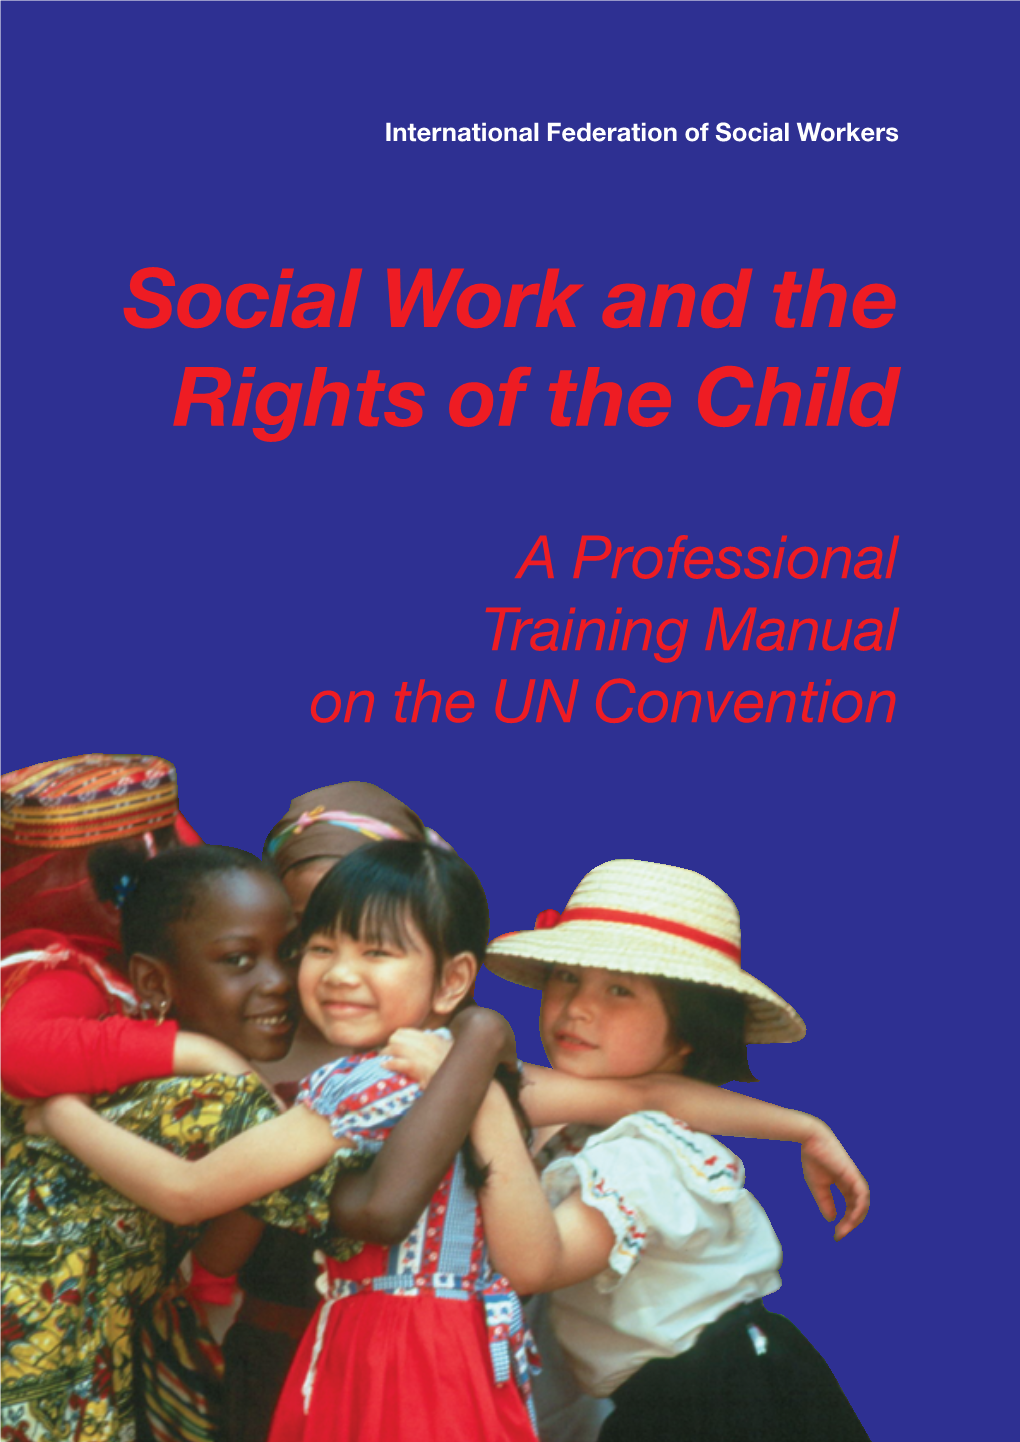 Social Work and the Rights of the Child